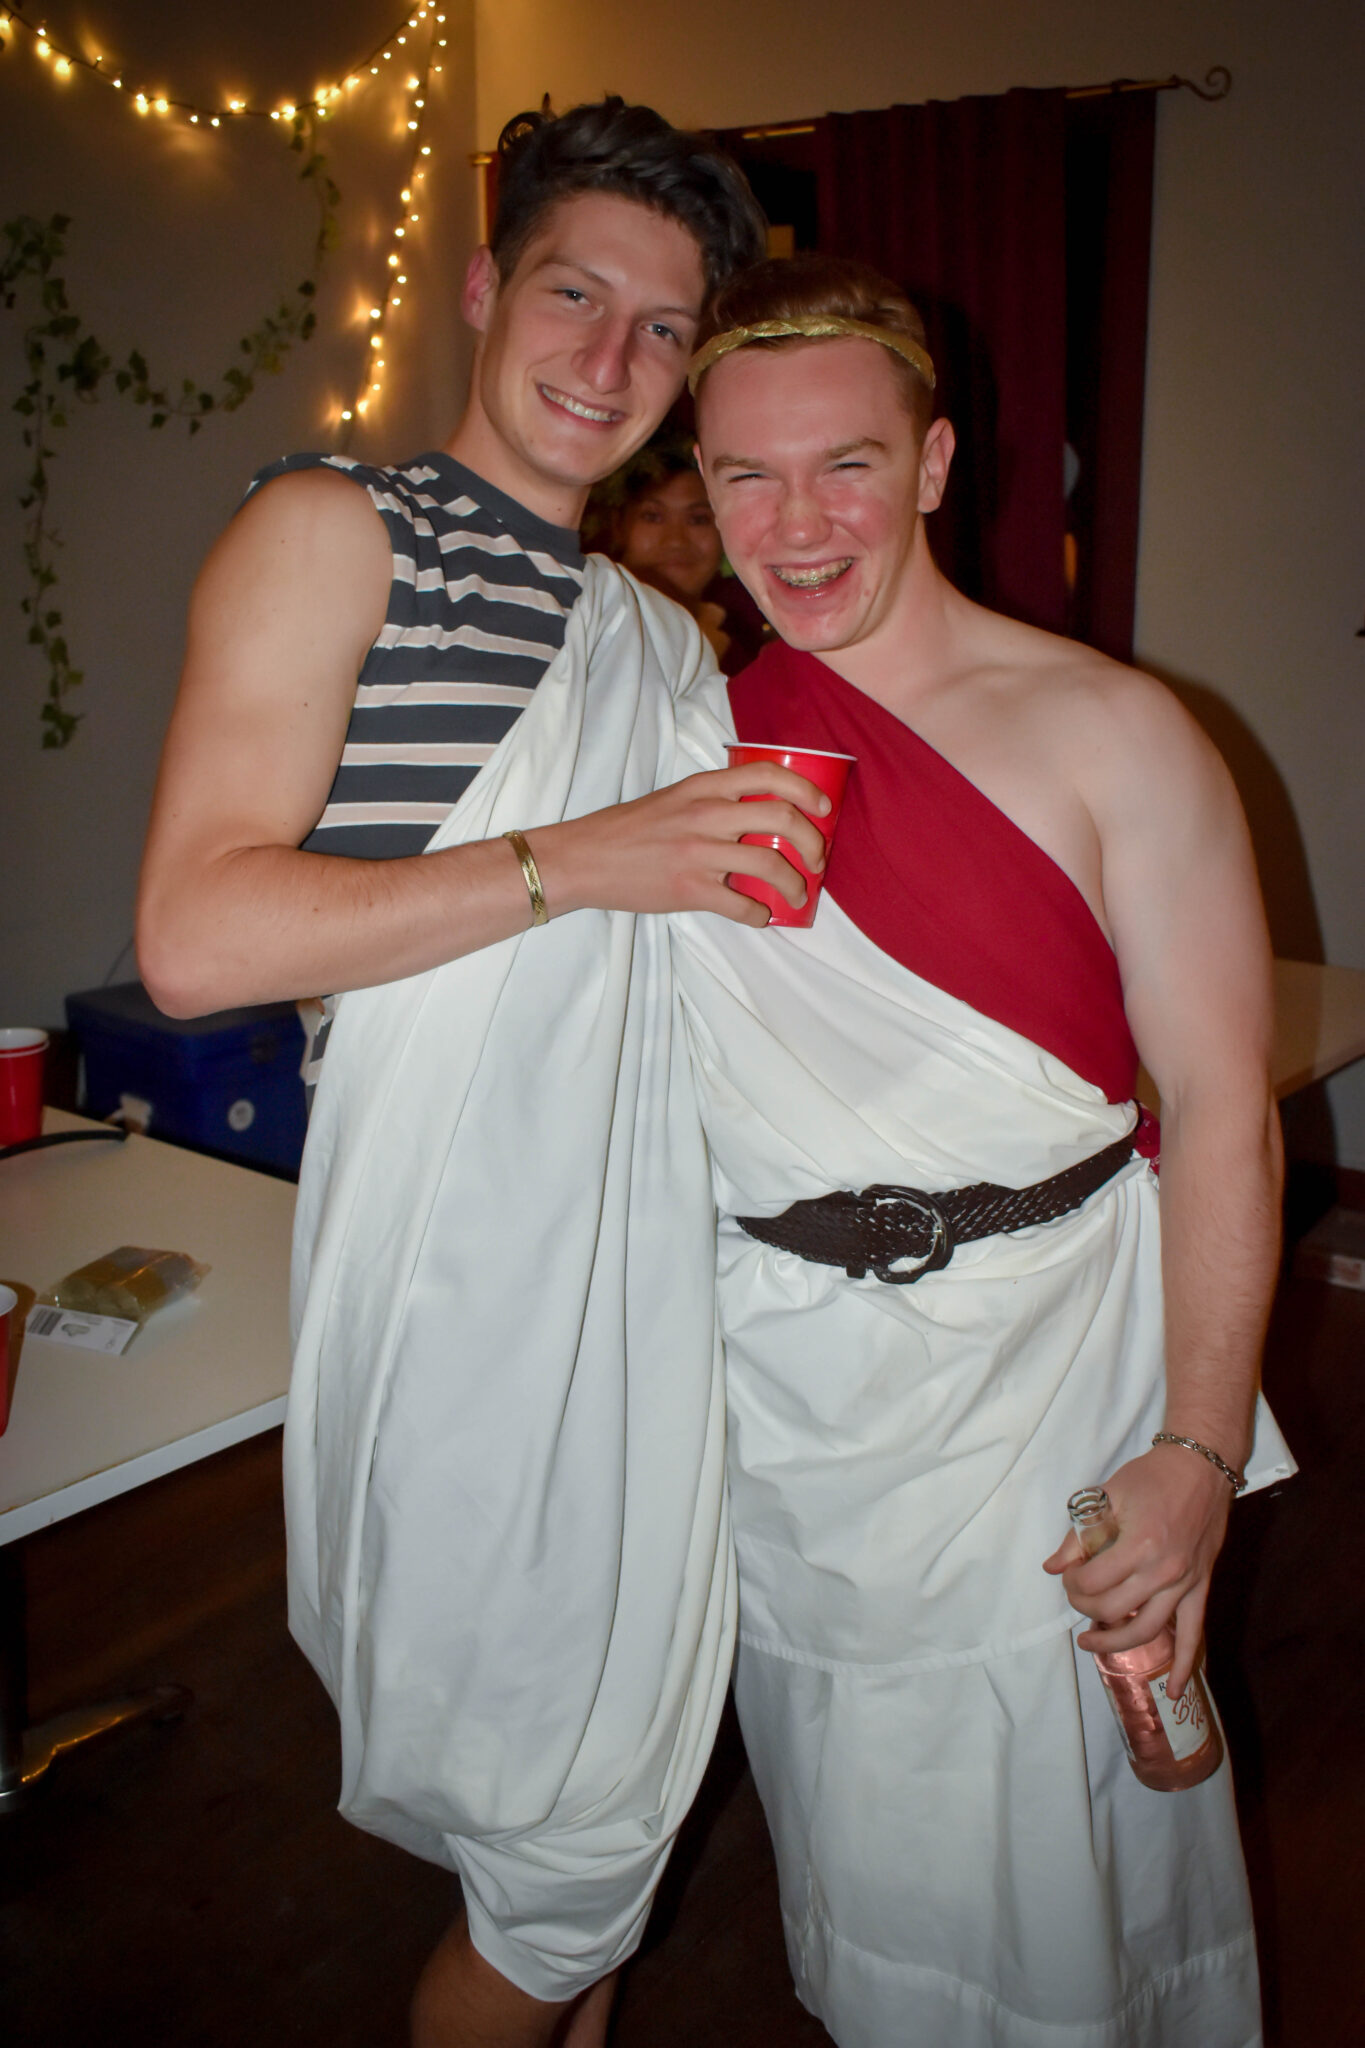 Classics-Week-Toga-Party-2021-Edited-11-scaled-1. Campion College Australia.